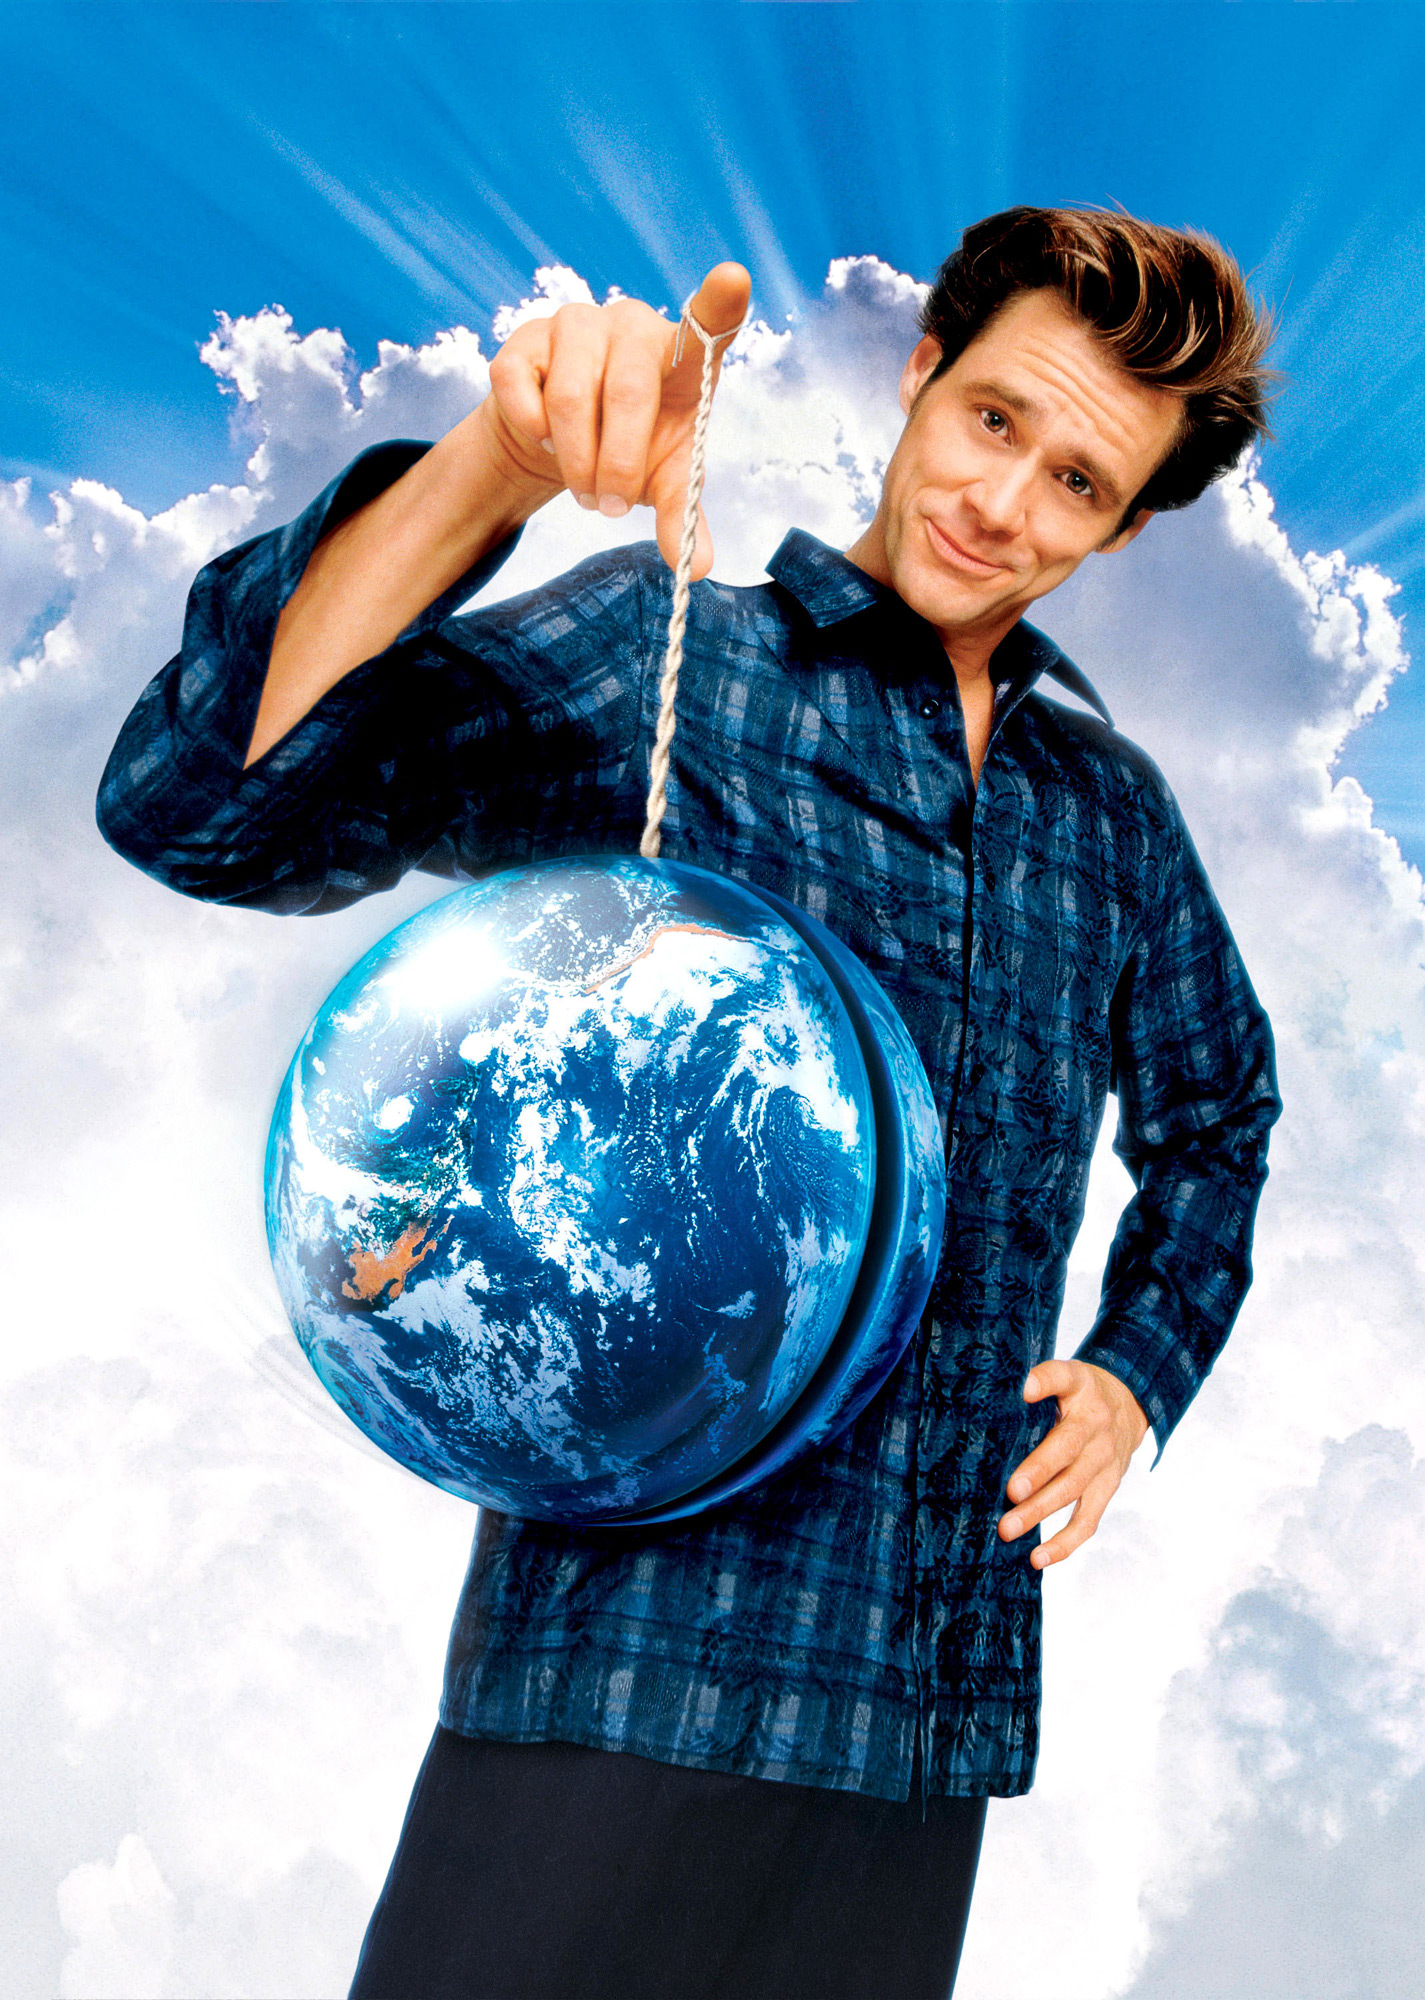 Cast ‘Bruce Almighty’: Where Are They Now?